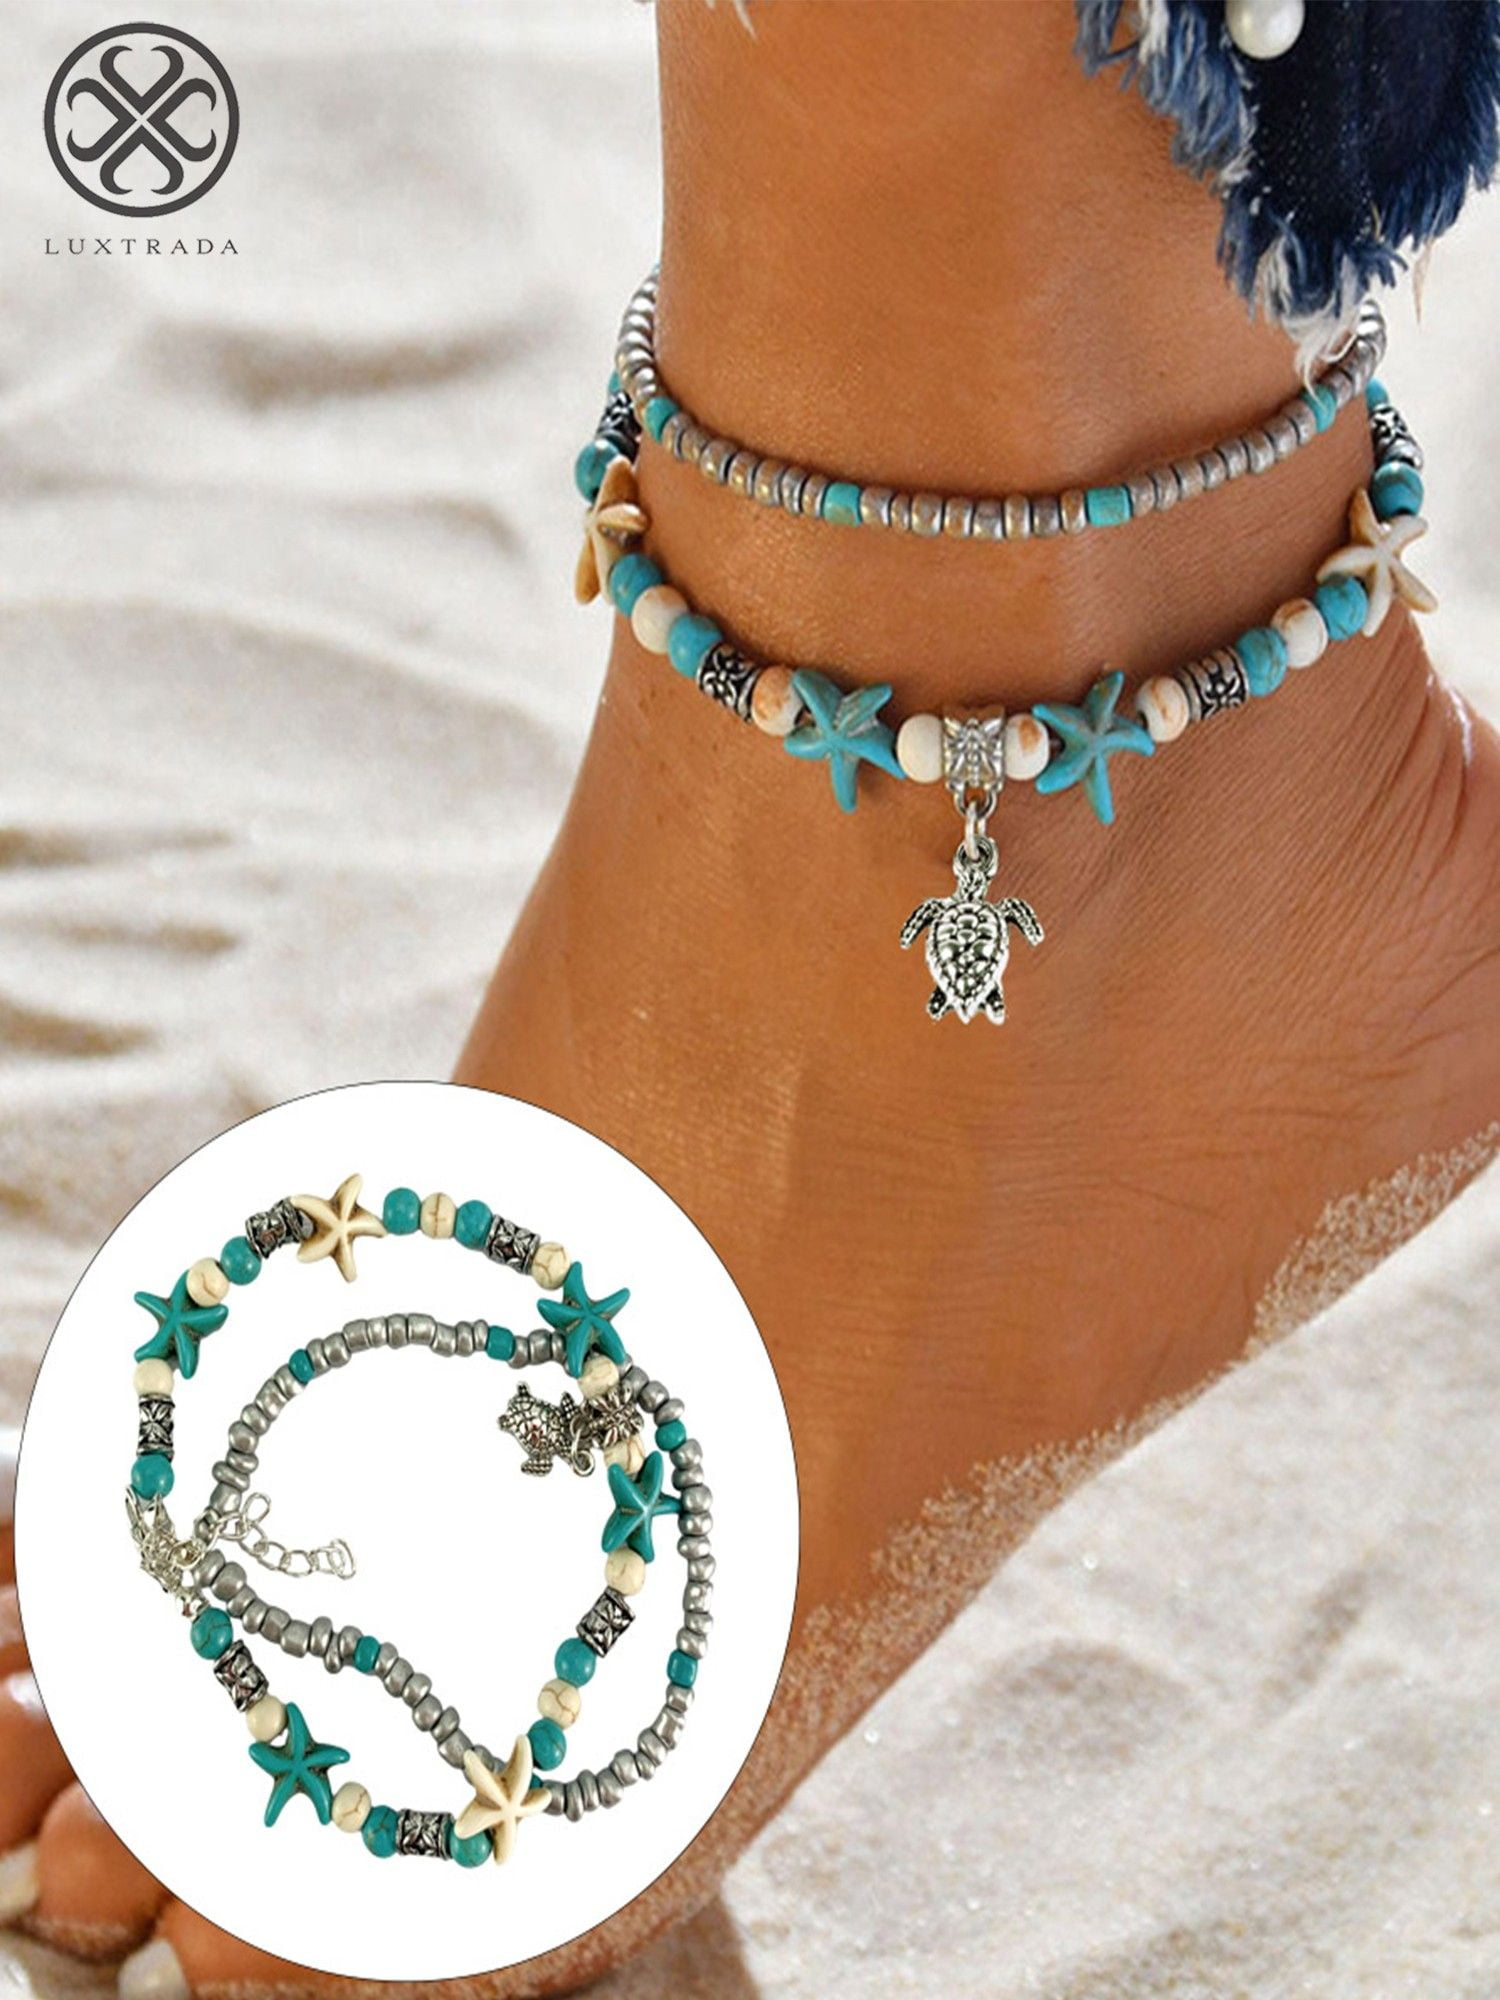 Bohemian Natural Cowrie Beads Shell Anklet Bracelet Handmade Beach Foot Jewelry